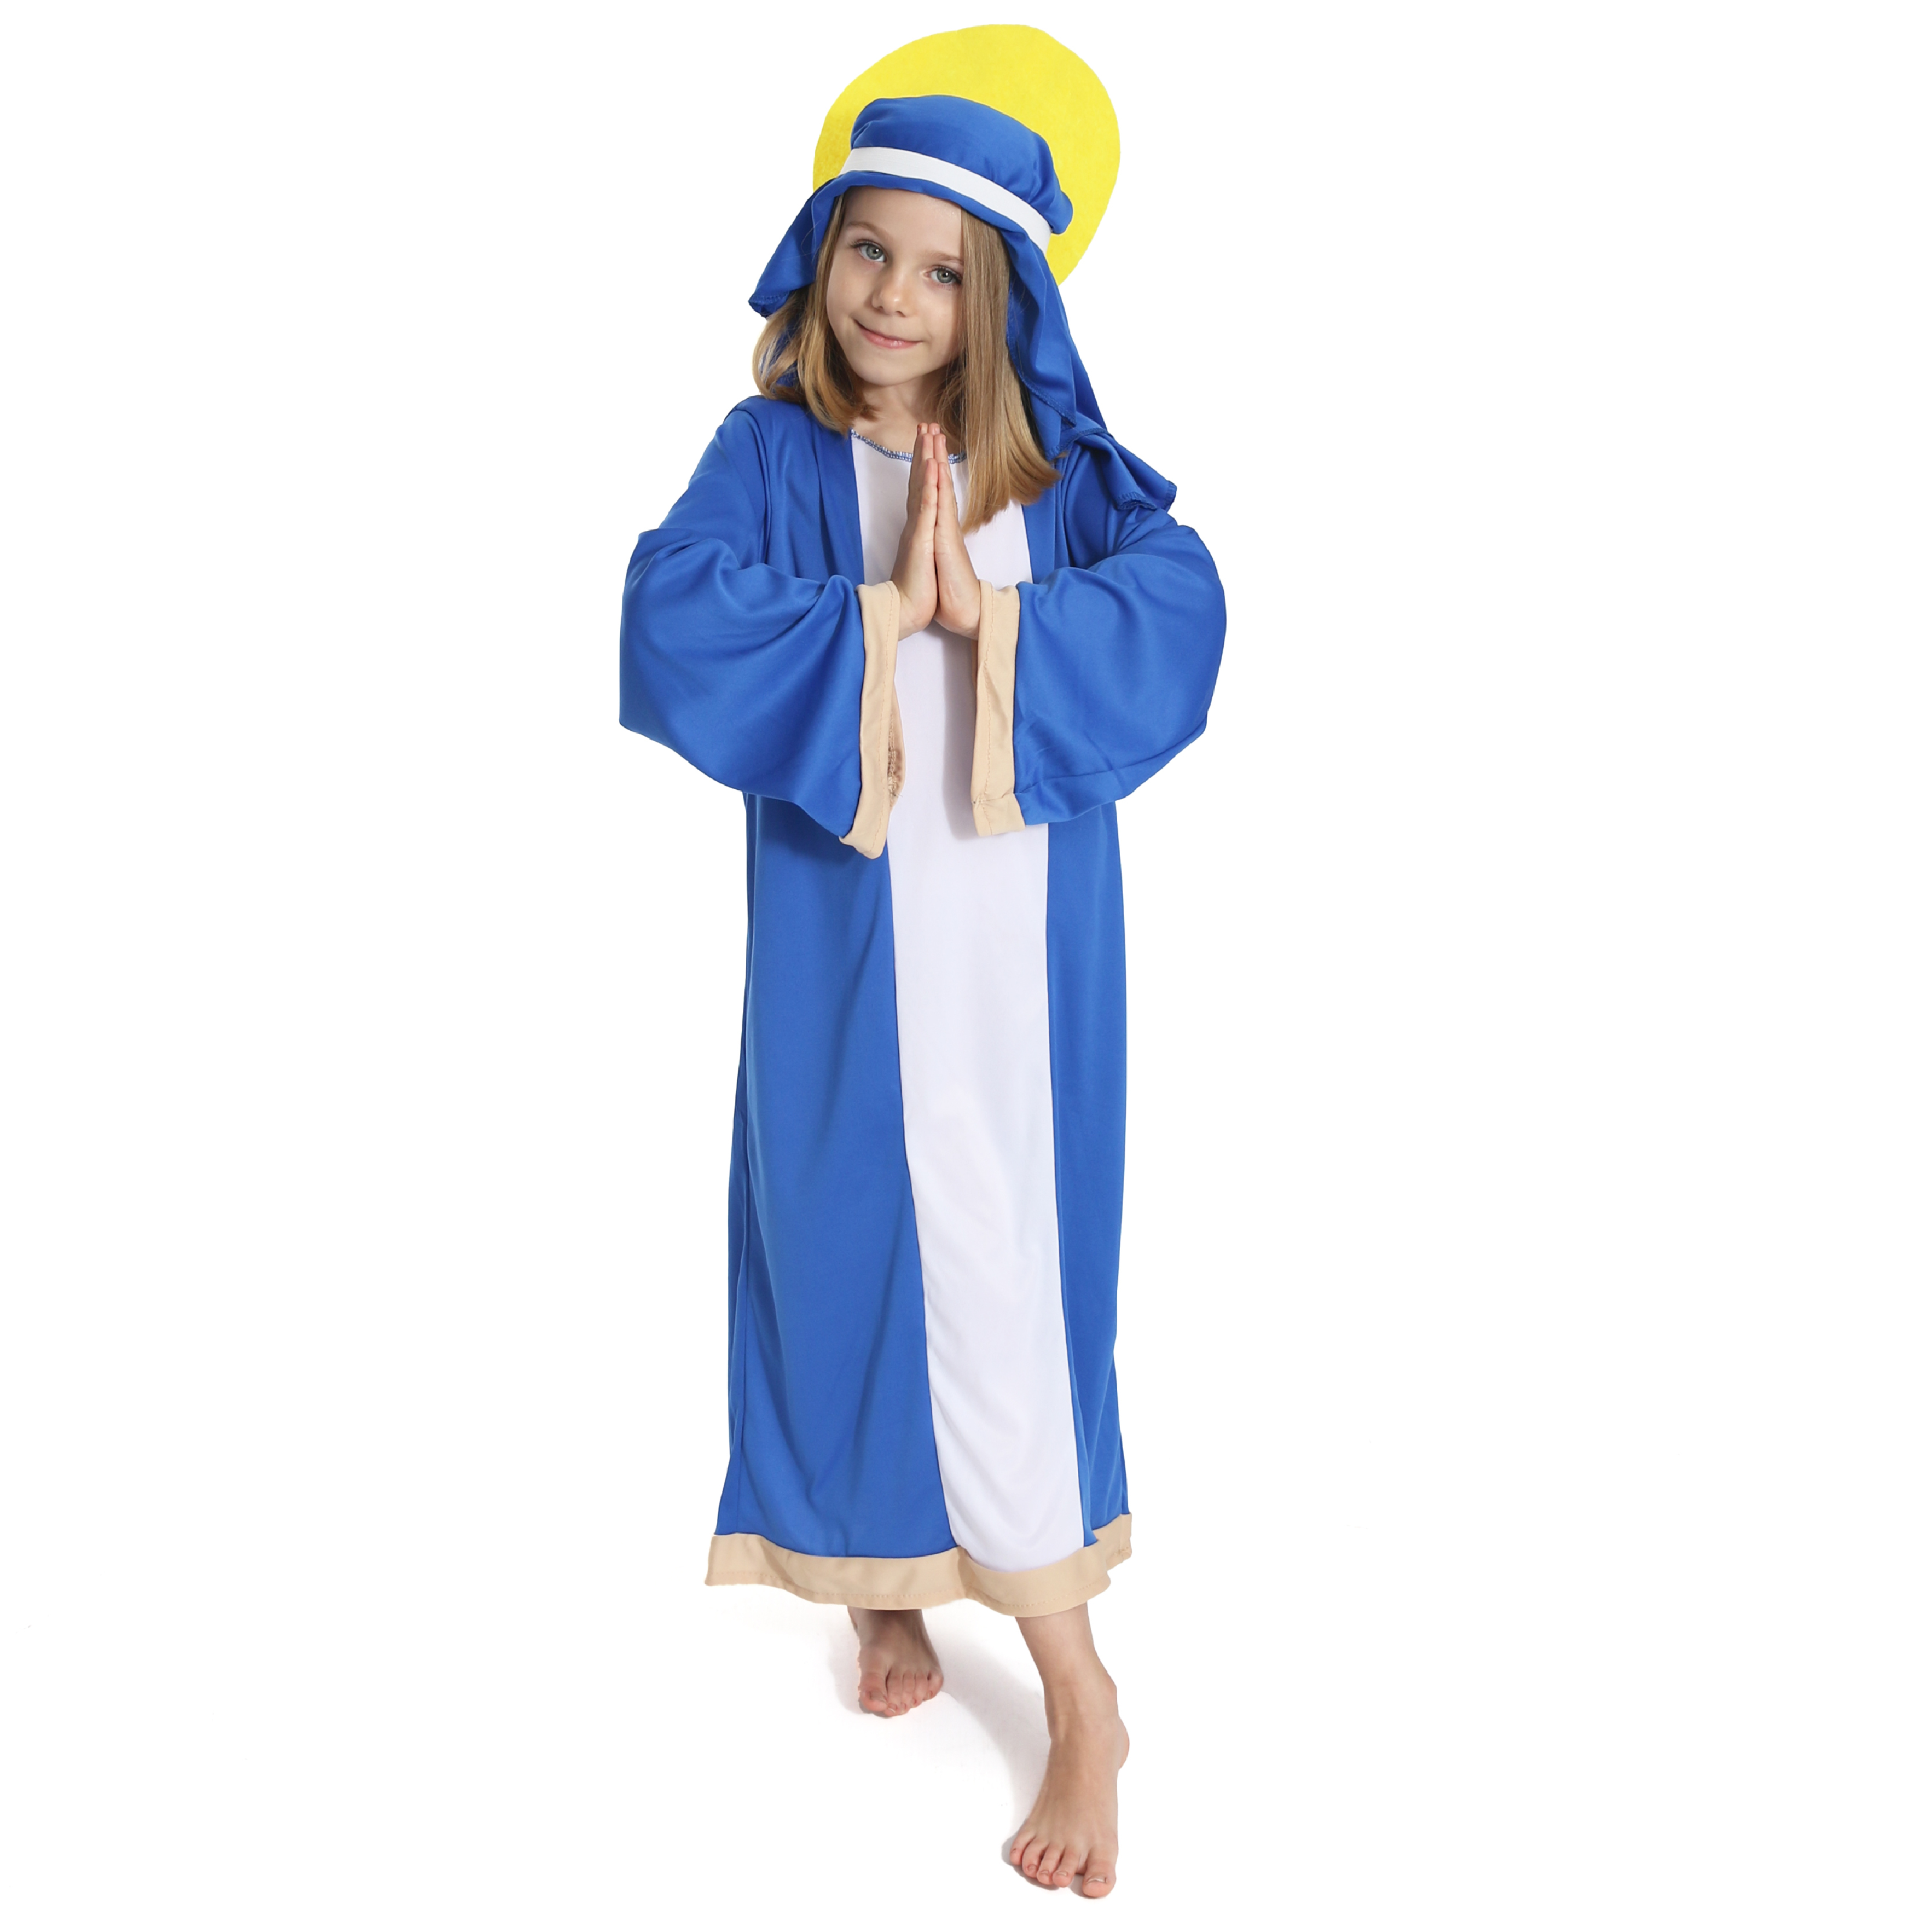 Buy Kaku Fancy Dresses Mother Mary Christmas Day Costume -White & Blue, 7-8  Years, For Girls Online at Low Prices in India - Amazon.in